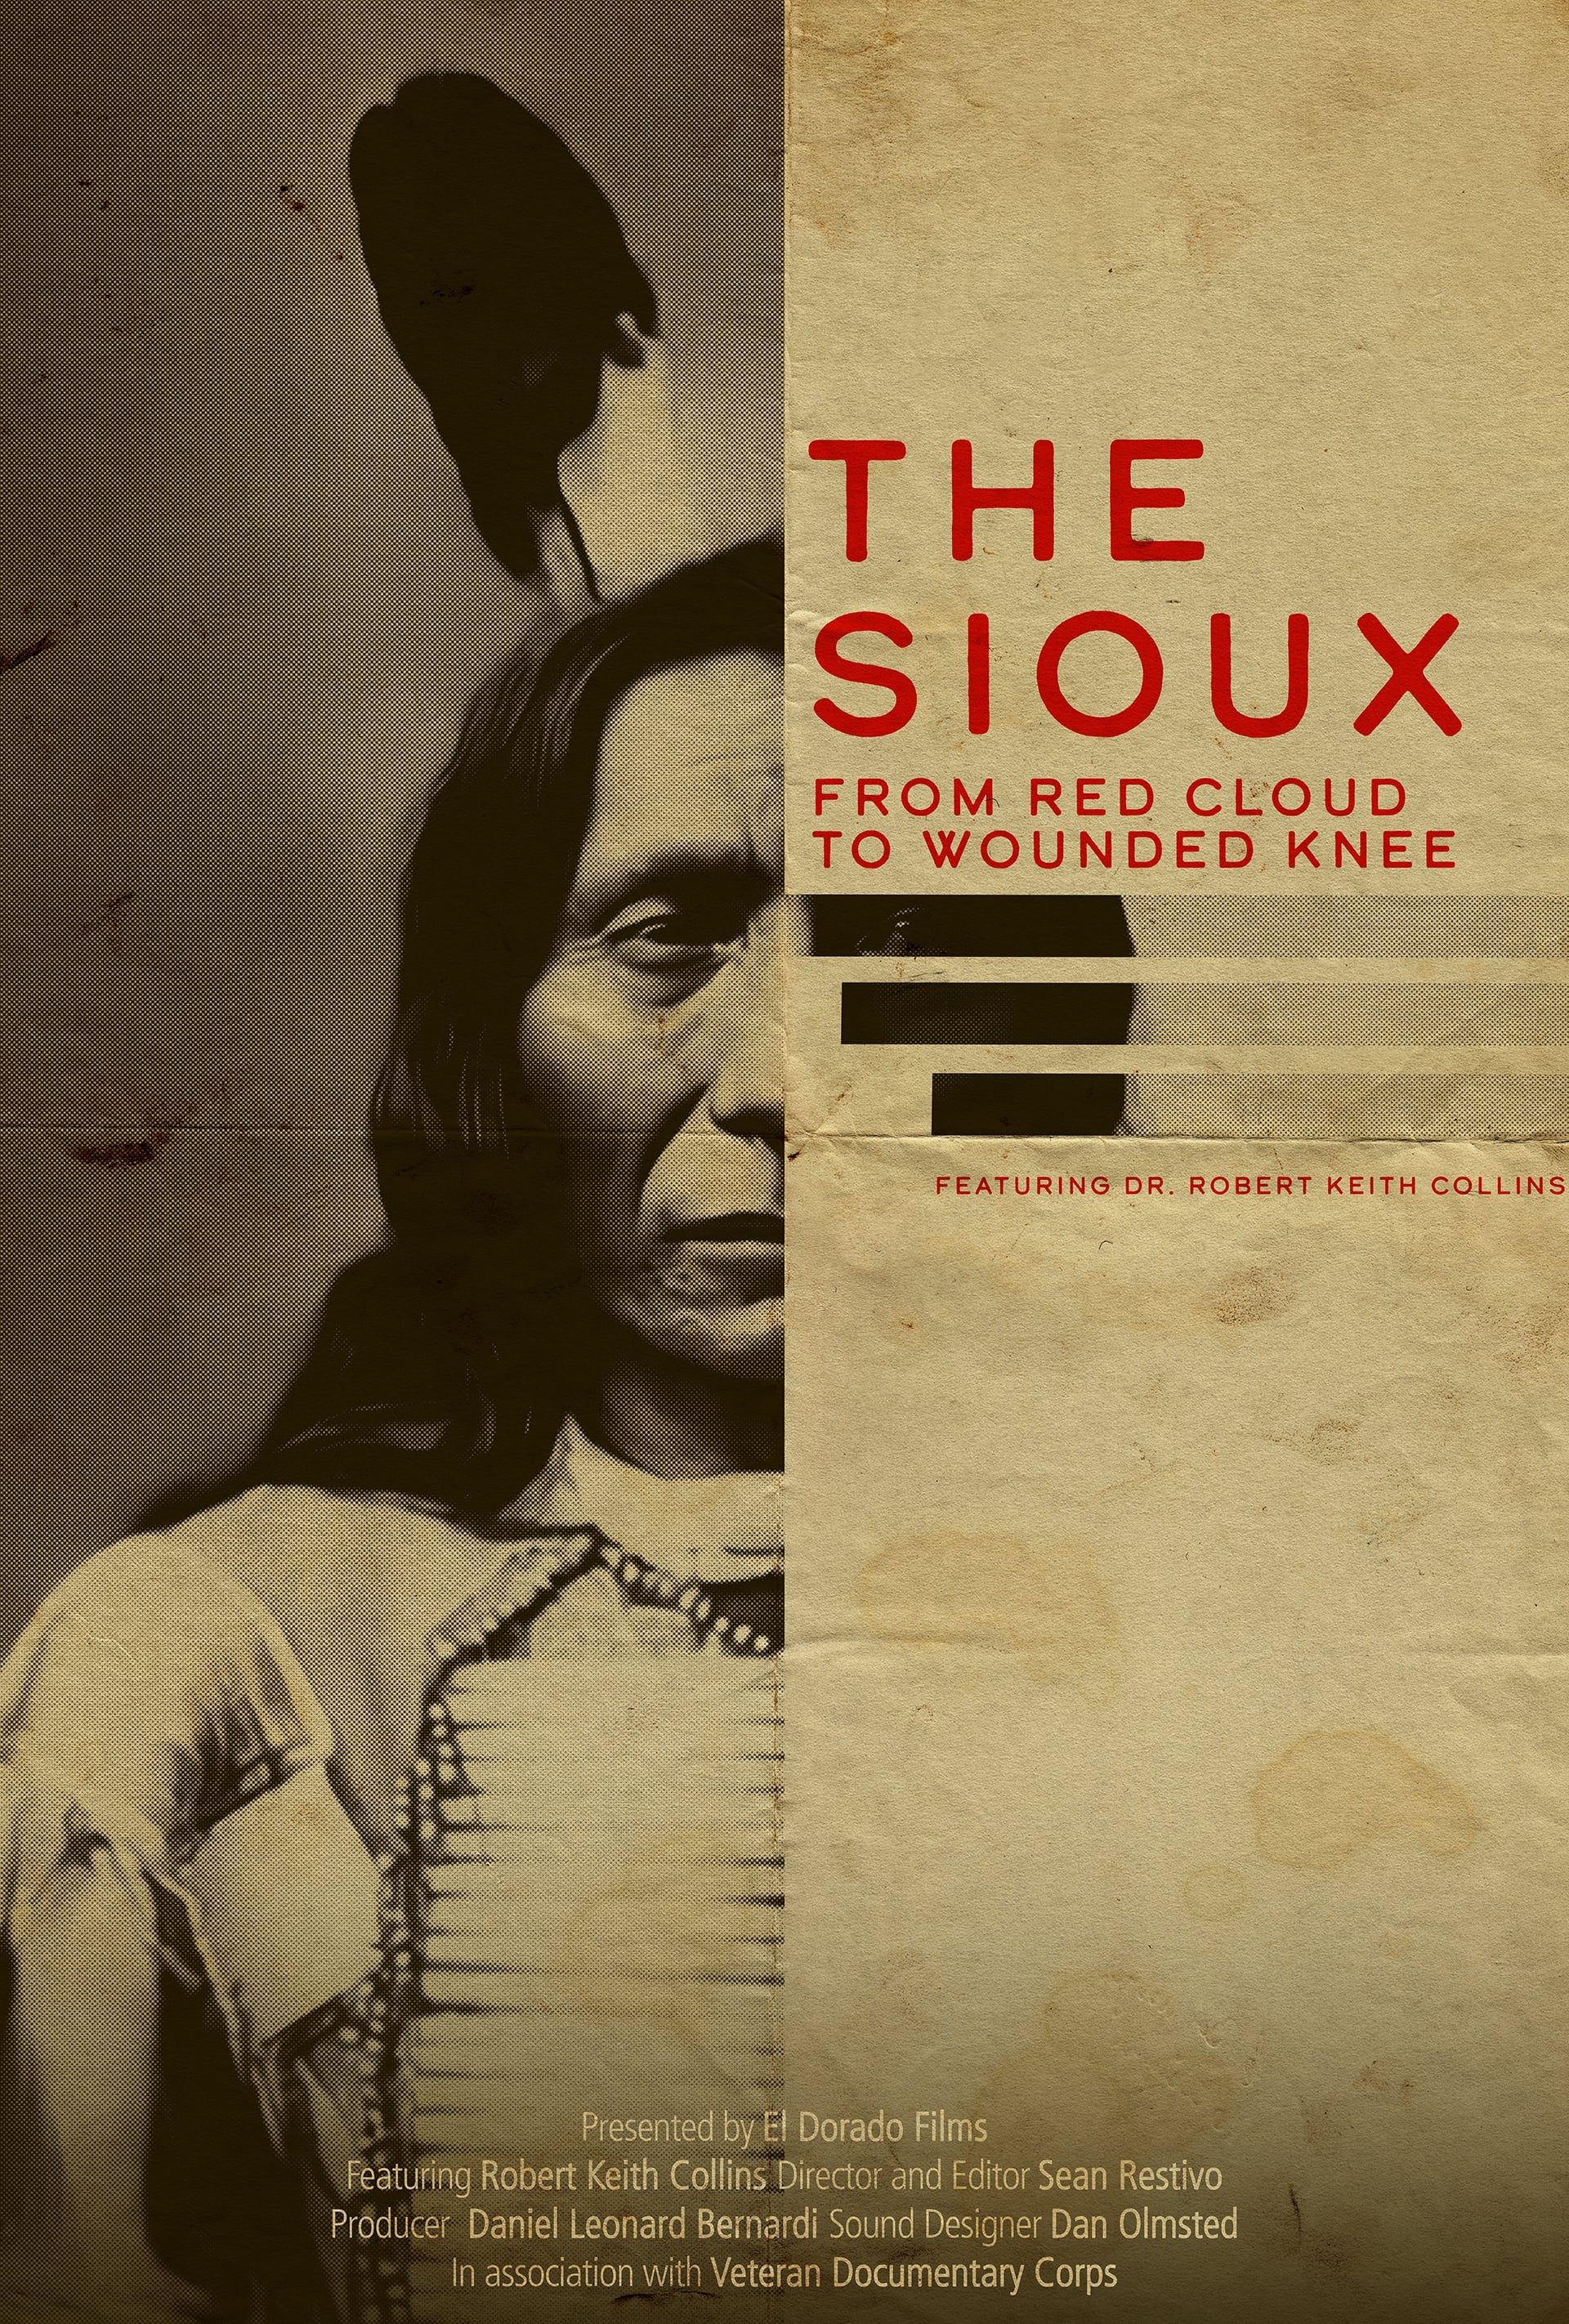 The Sioux: From Red Cloud to Wounded Knee